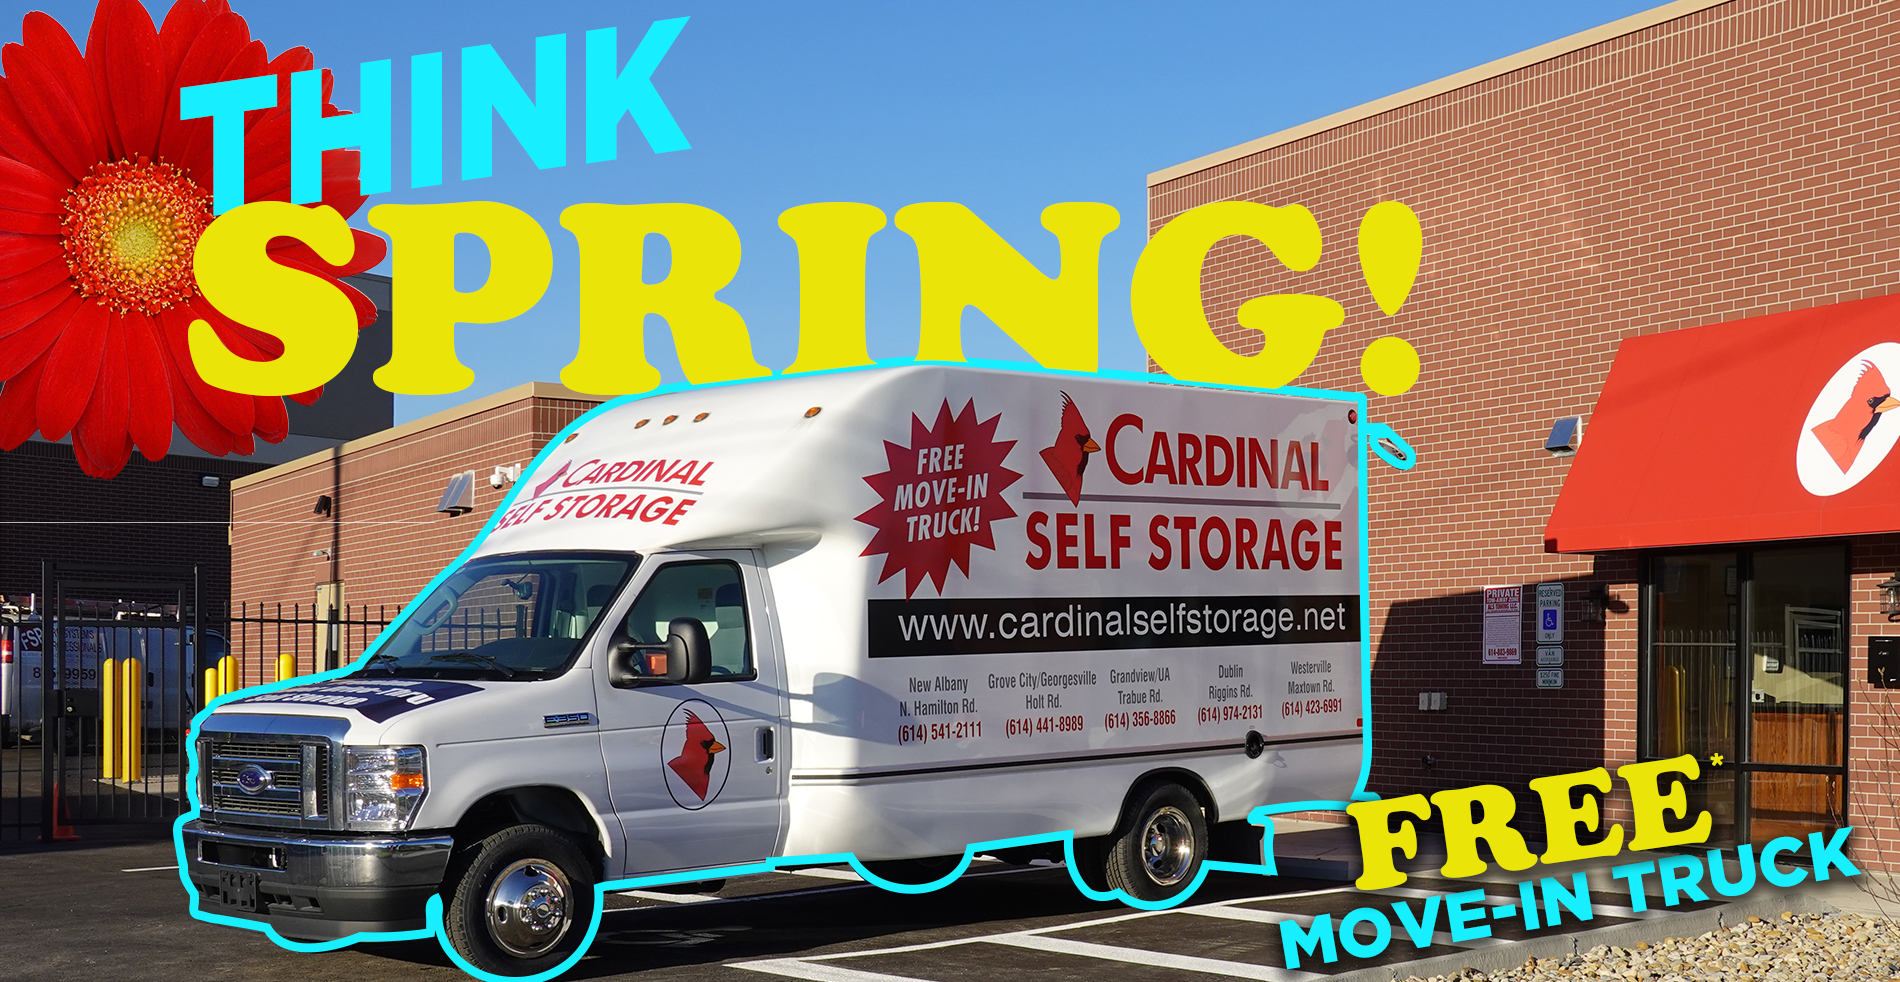 THINK SPRING FREE MOVE IN TRUCK